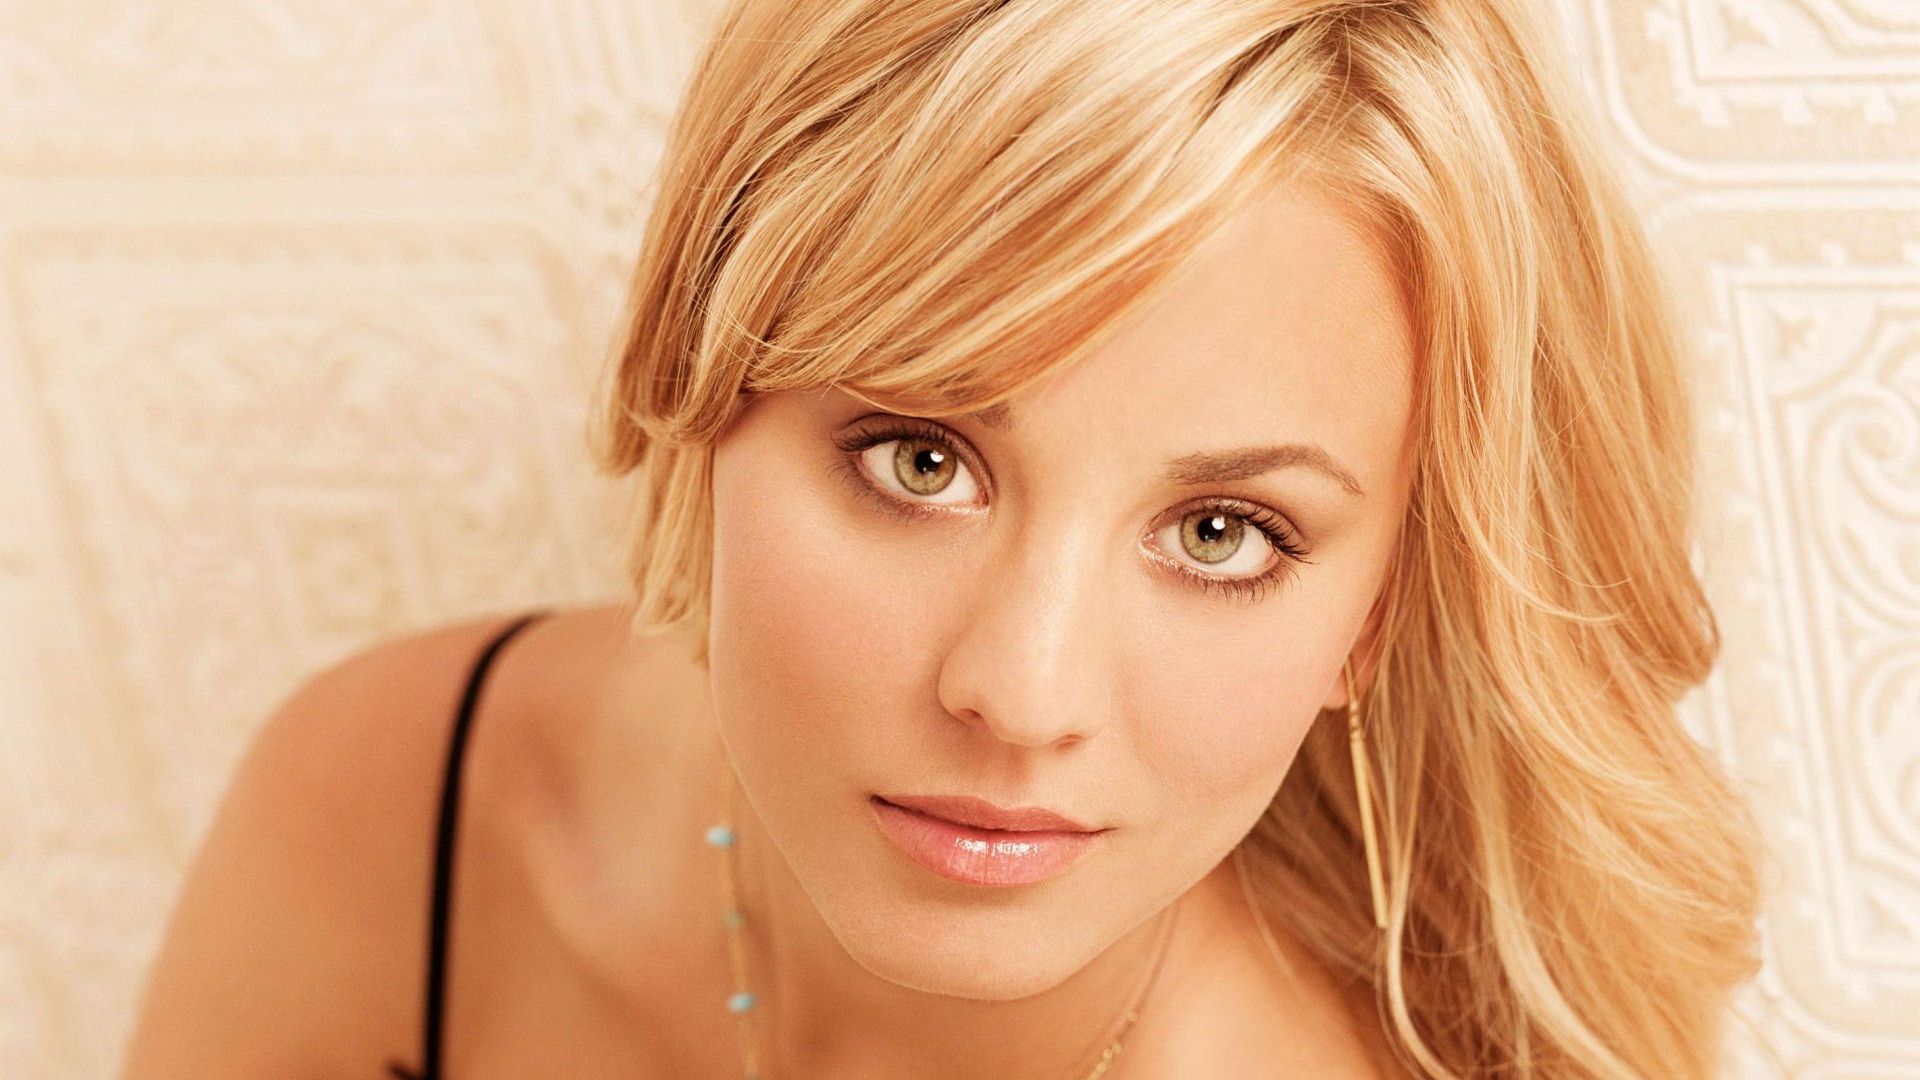 Kaley Cuoco With Green Eyes Wallpaper